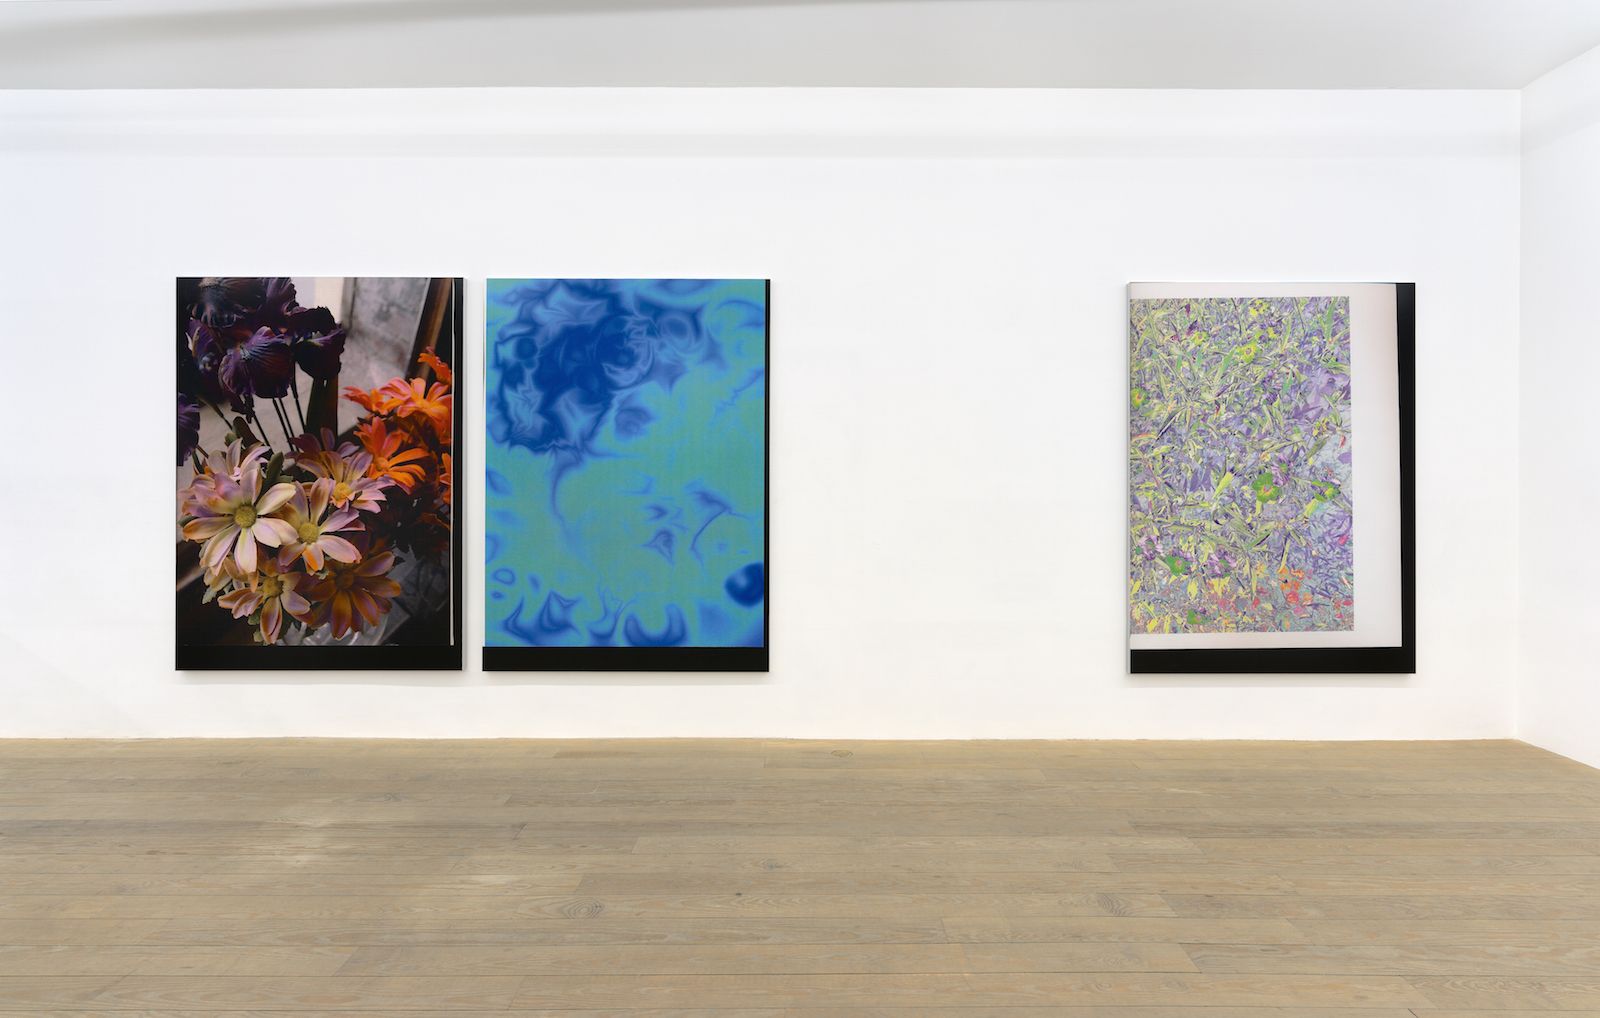 Travess Smalley, 2015, installation view, Foxy Production, New York